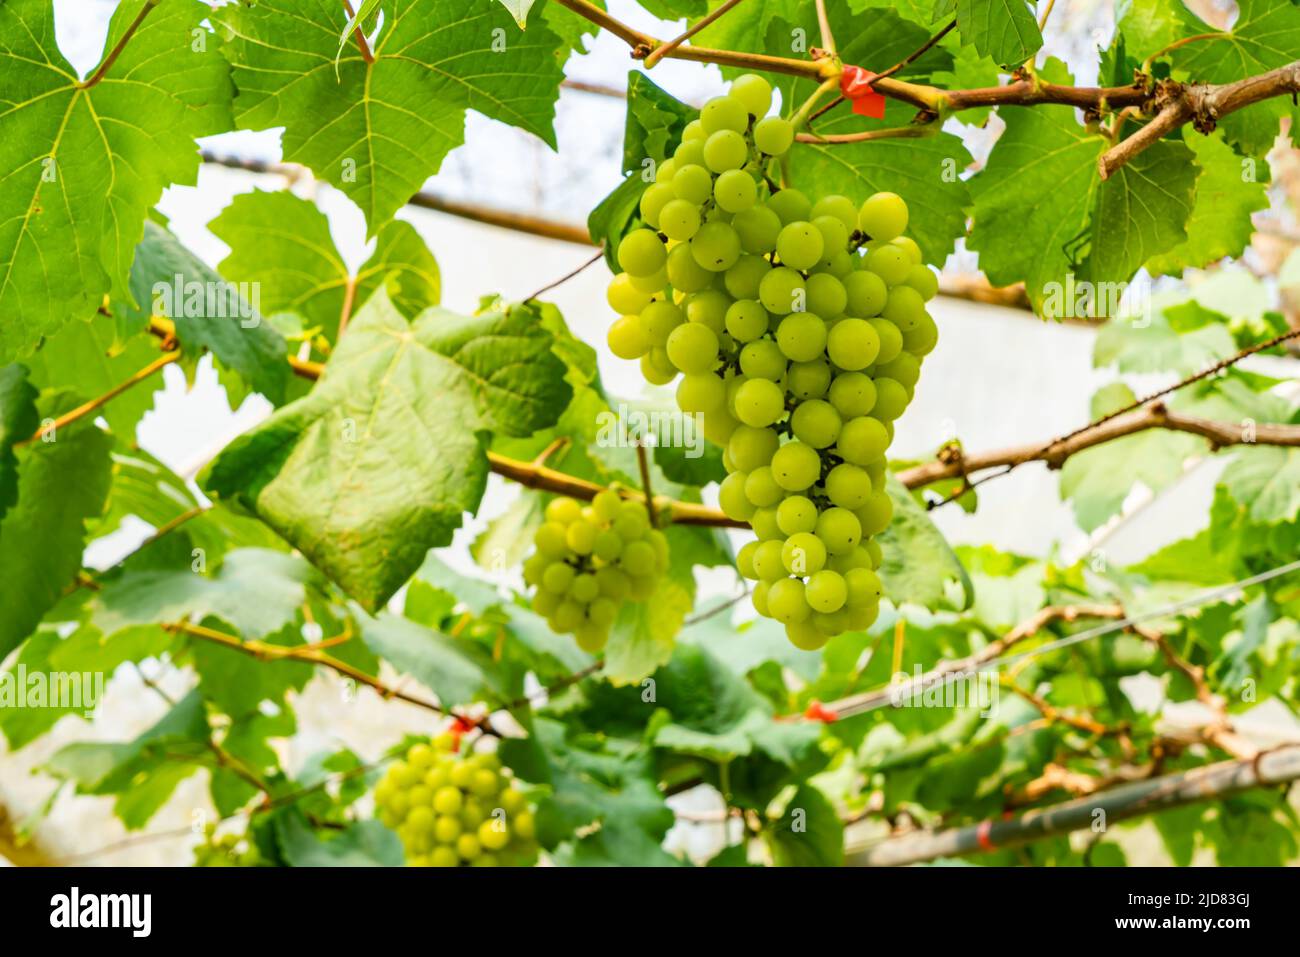 Bunch of fresh  grapes on a vine. Fresh white grapes hanging on branches of vine in vineyard with leaves in the background. Stock Photo